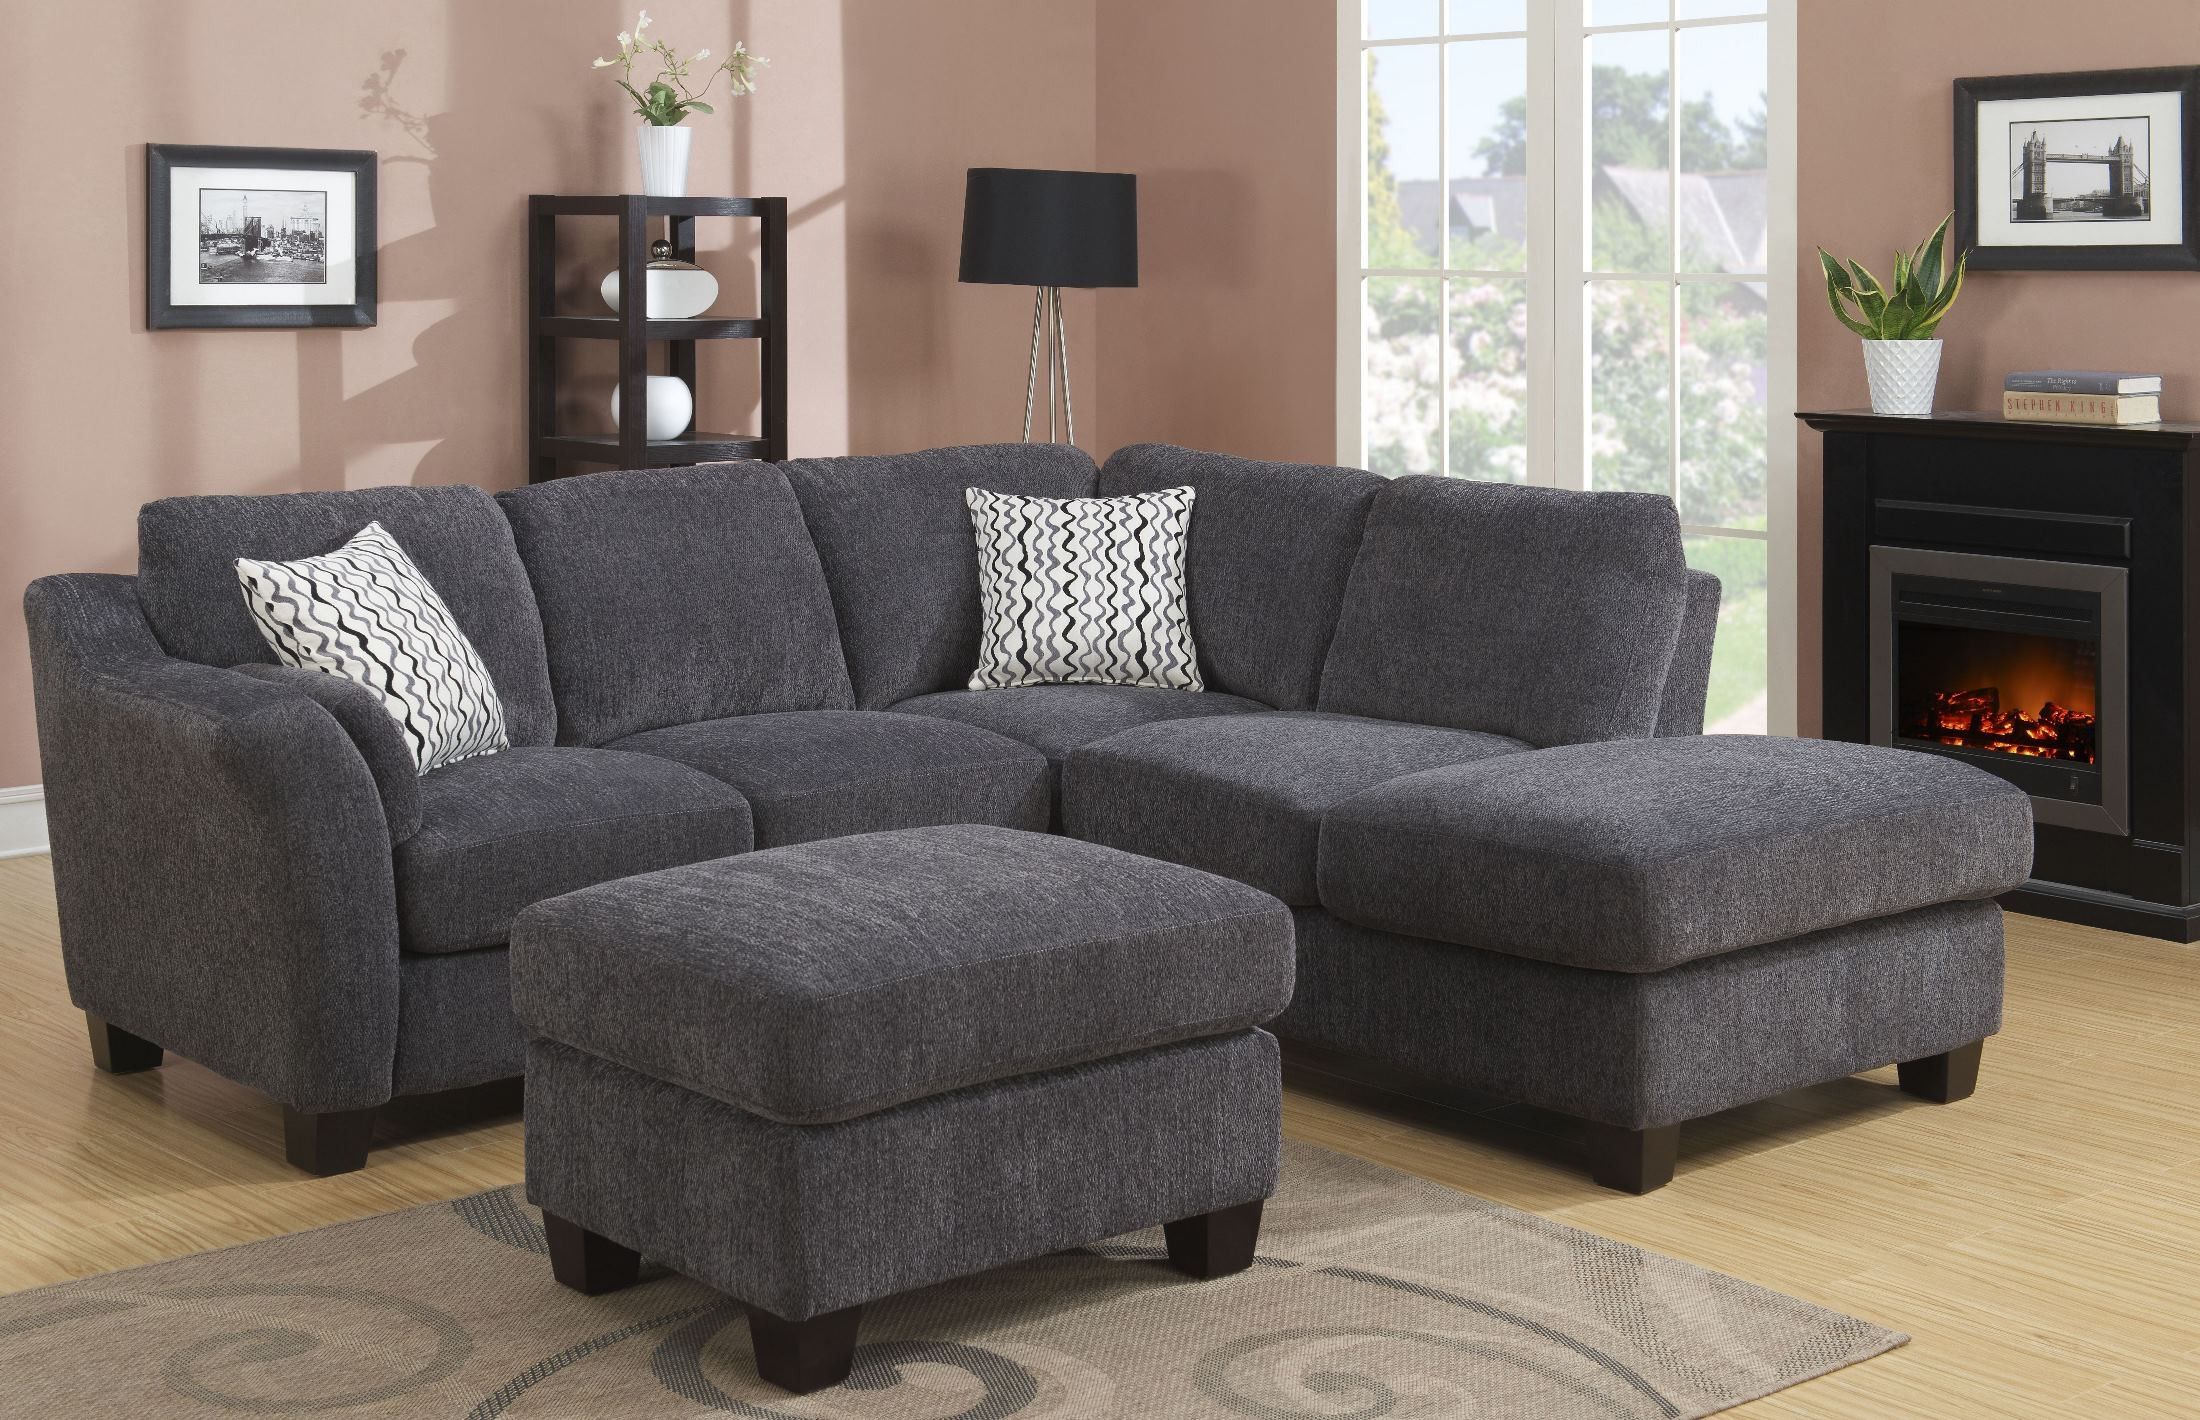 Clayton Ii Charcoal 2 Piece Sectional, U8060E 11 12 23 K With 2Pc Burland Contemporary Sectional Sofas Charcoal (View 14 of 15)